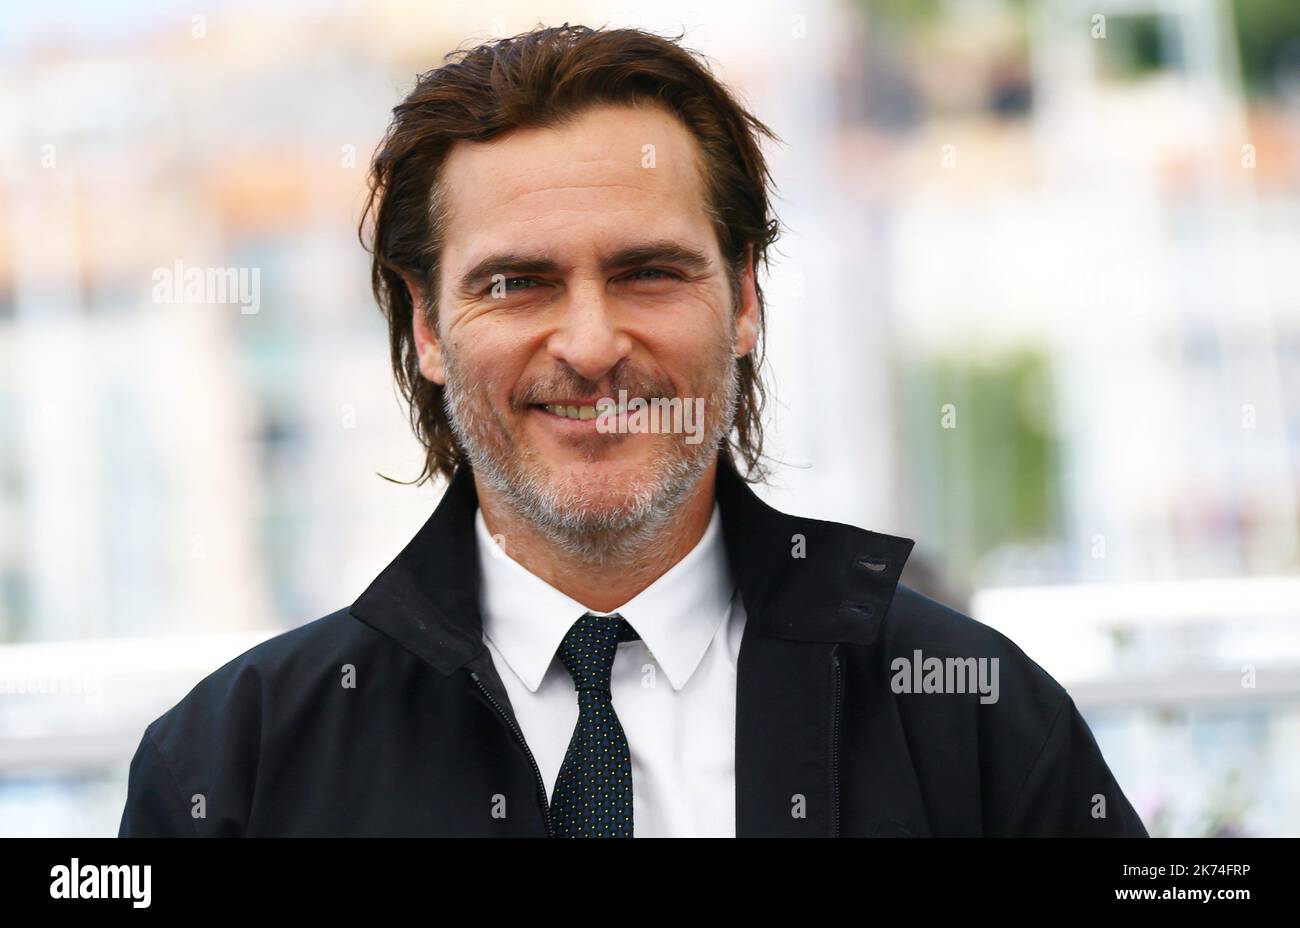 ©PHOTOPQR/NICE MATIN ; US actor Joaquin Phoenix poses on May 27, 2017 during a photocall for the film 'You Were Never Really Here' at the 70th edition of the Cannes Film Festival in Cannes, southern France.   70th annual Cannes Film Festival in Cannes, France, May 2017. The film festival will run from 17 to 28 May. Stock Photo